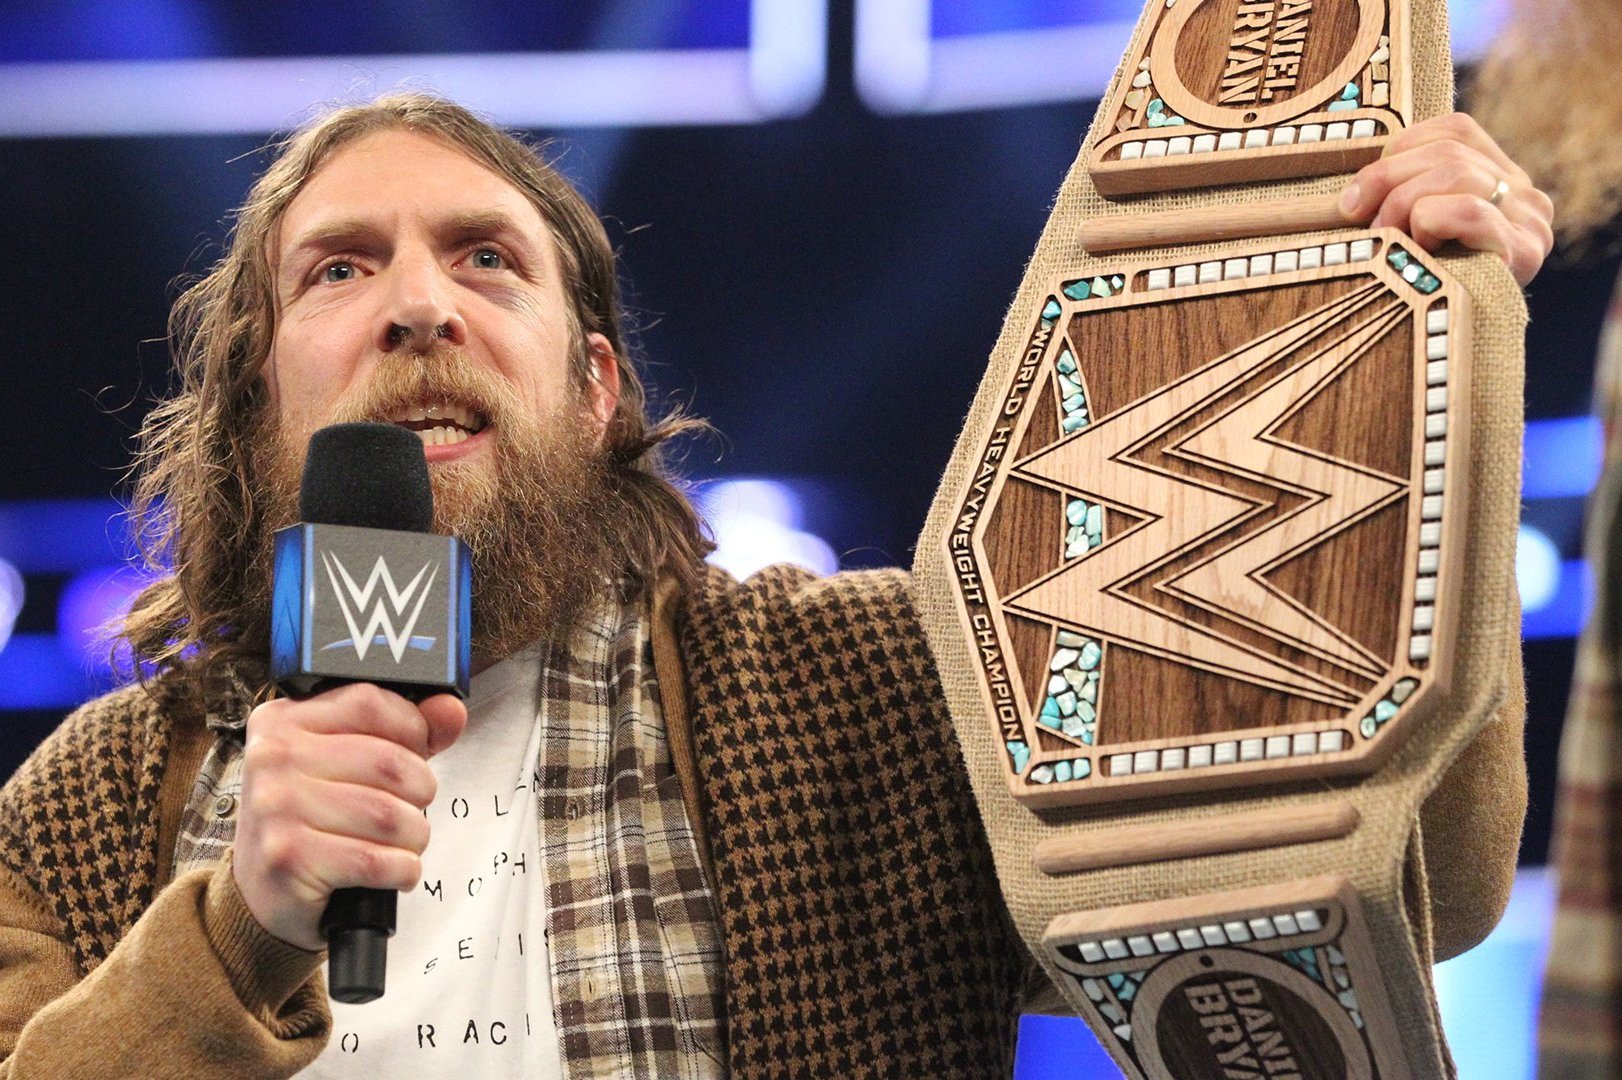 Ranking Daniel Bryan S Eco Belt And Top Custom Wwe Championship Title Designs Bleacher Report Latest News Videos And Highlights